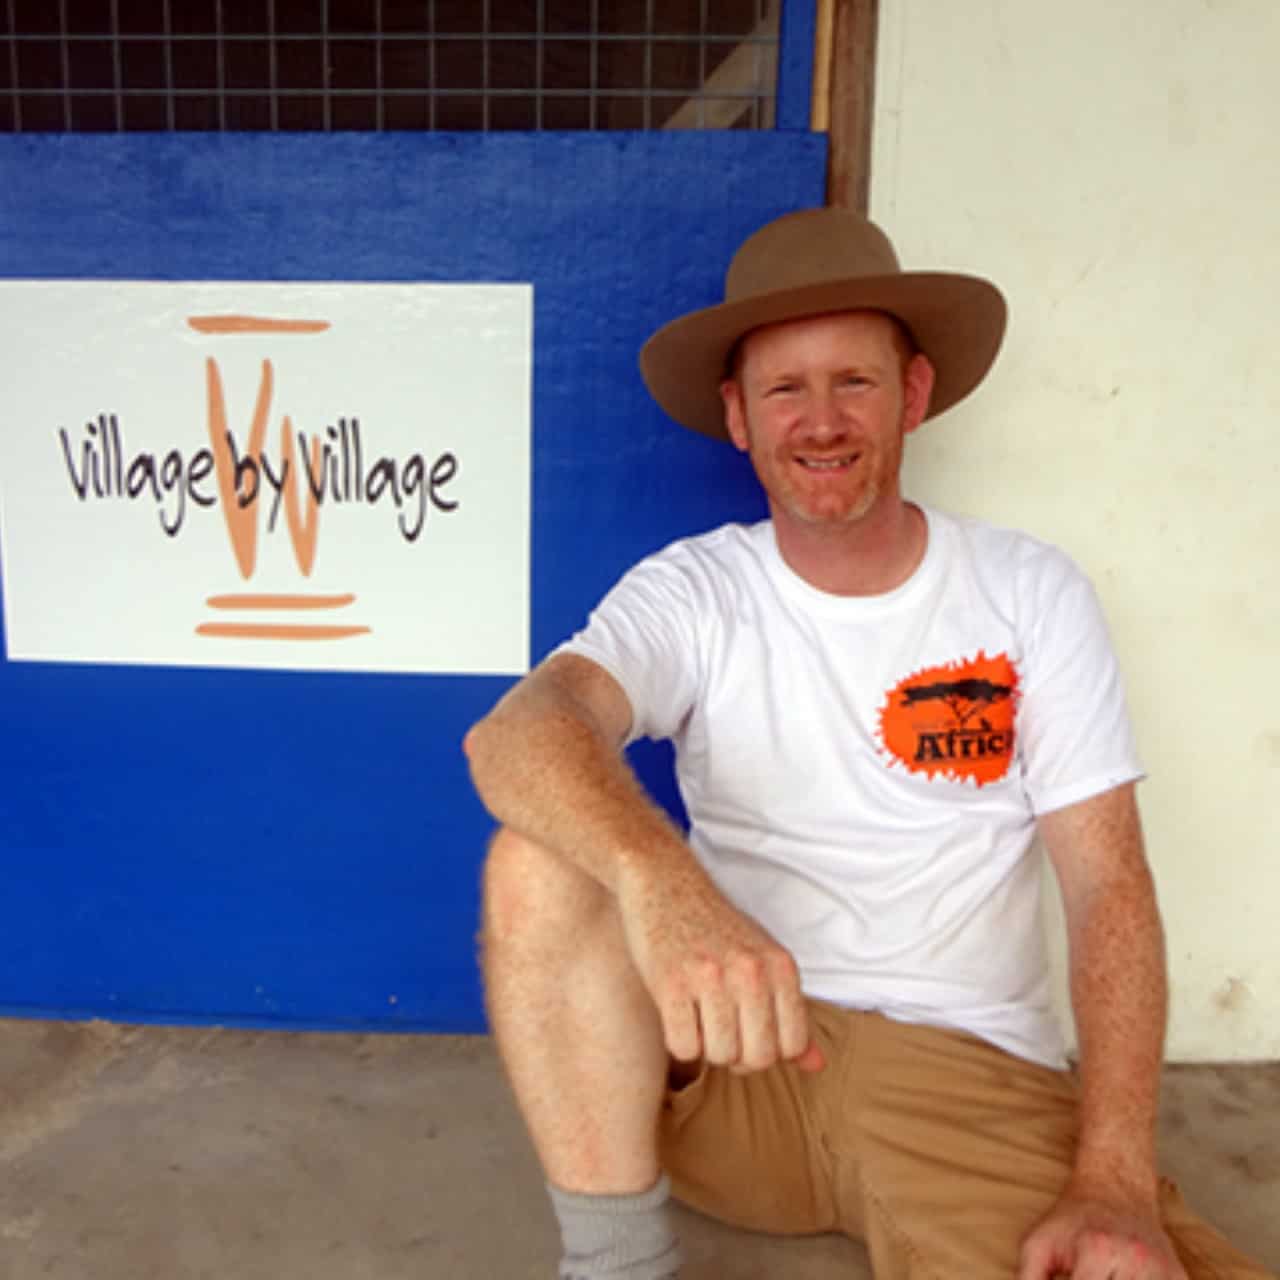 Dave sitting by the old Village by Village logo in shorts, a white tee, and a wide brimmed hat